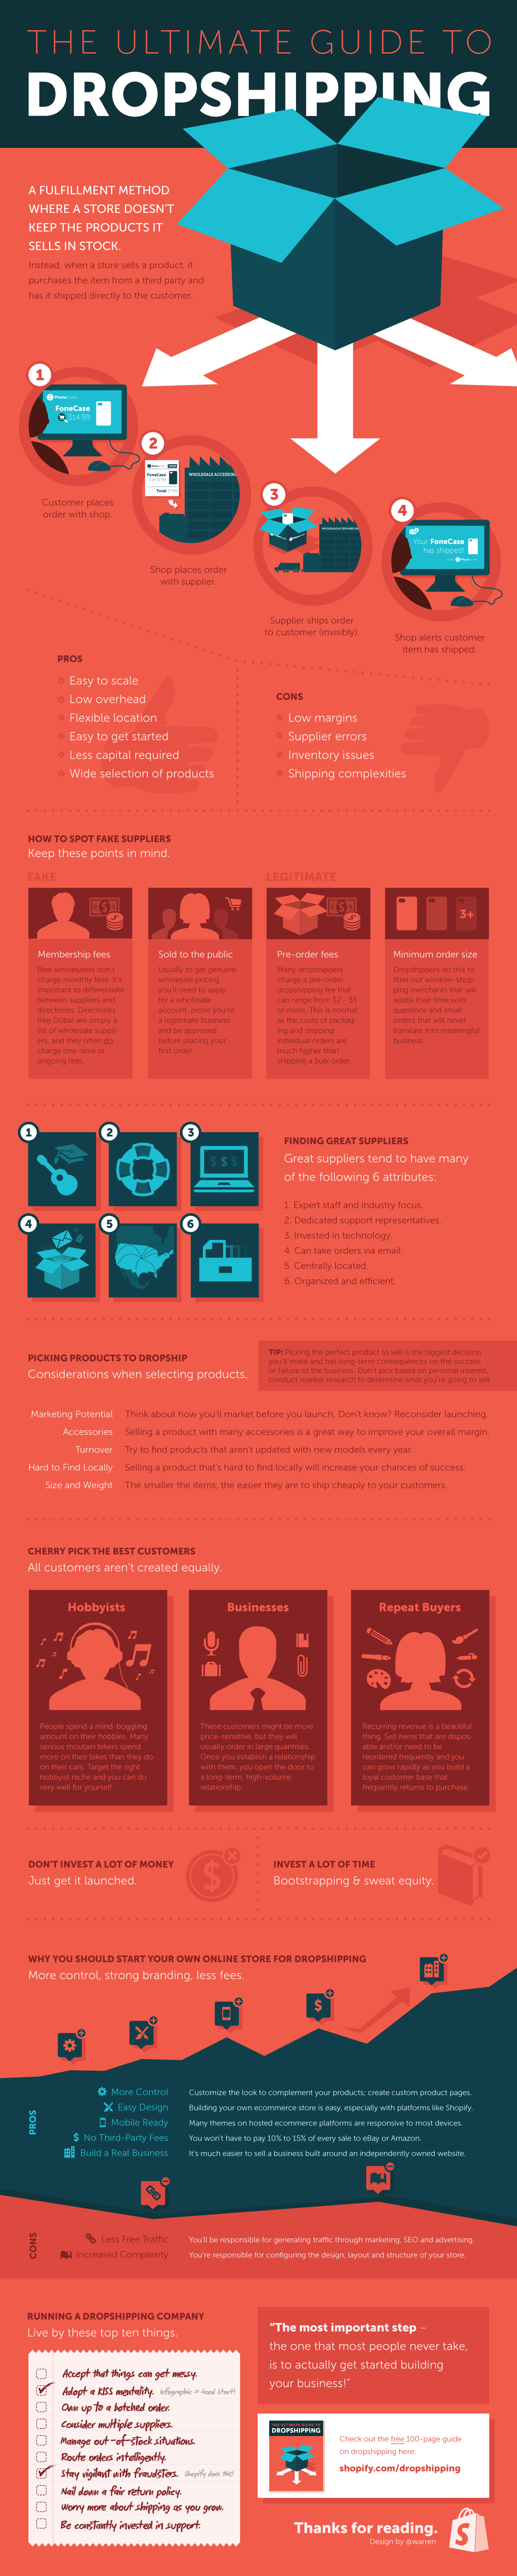 dropshipping infographic